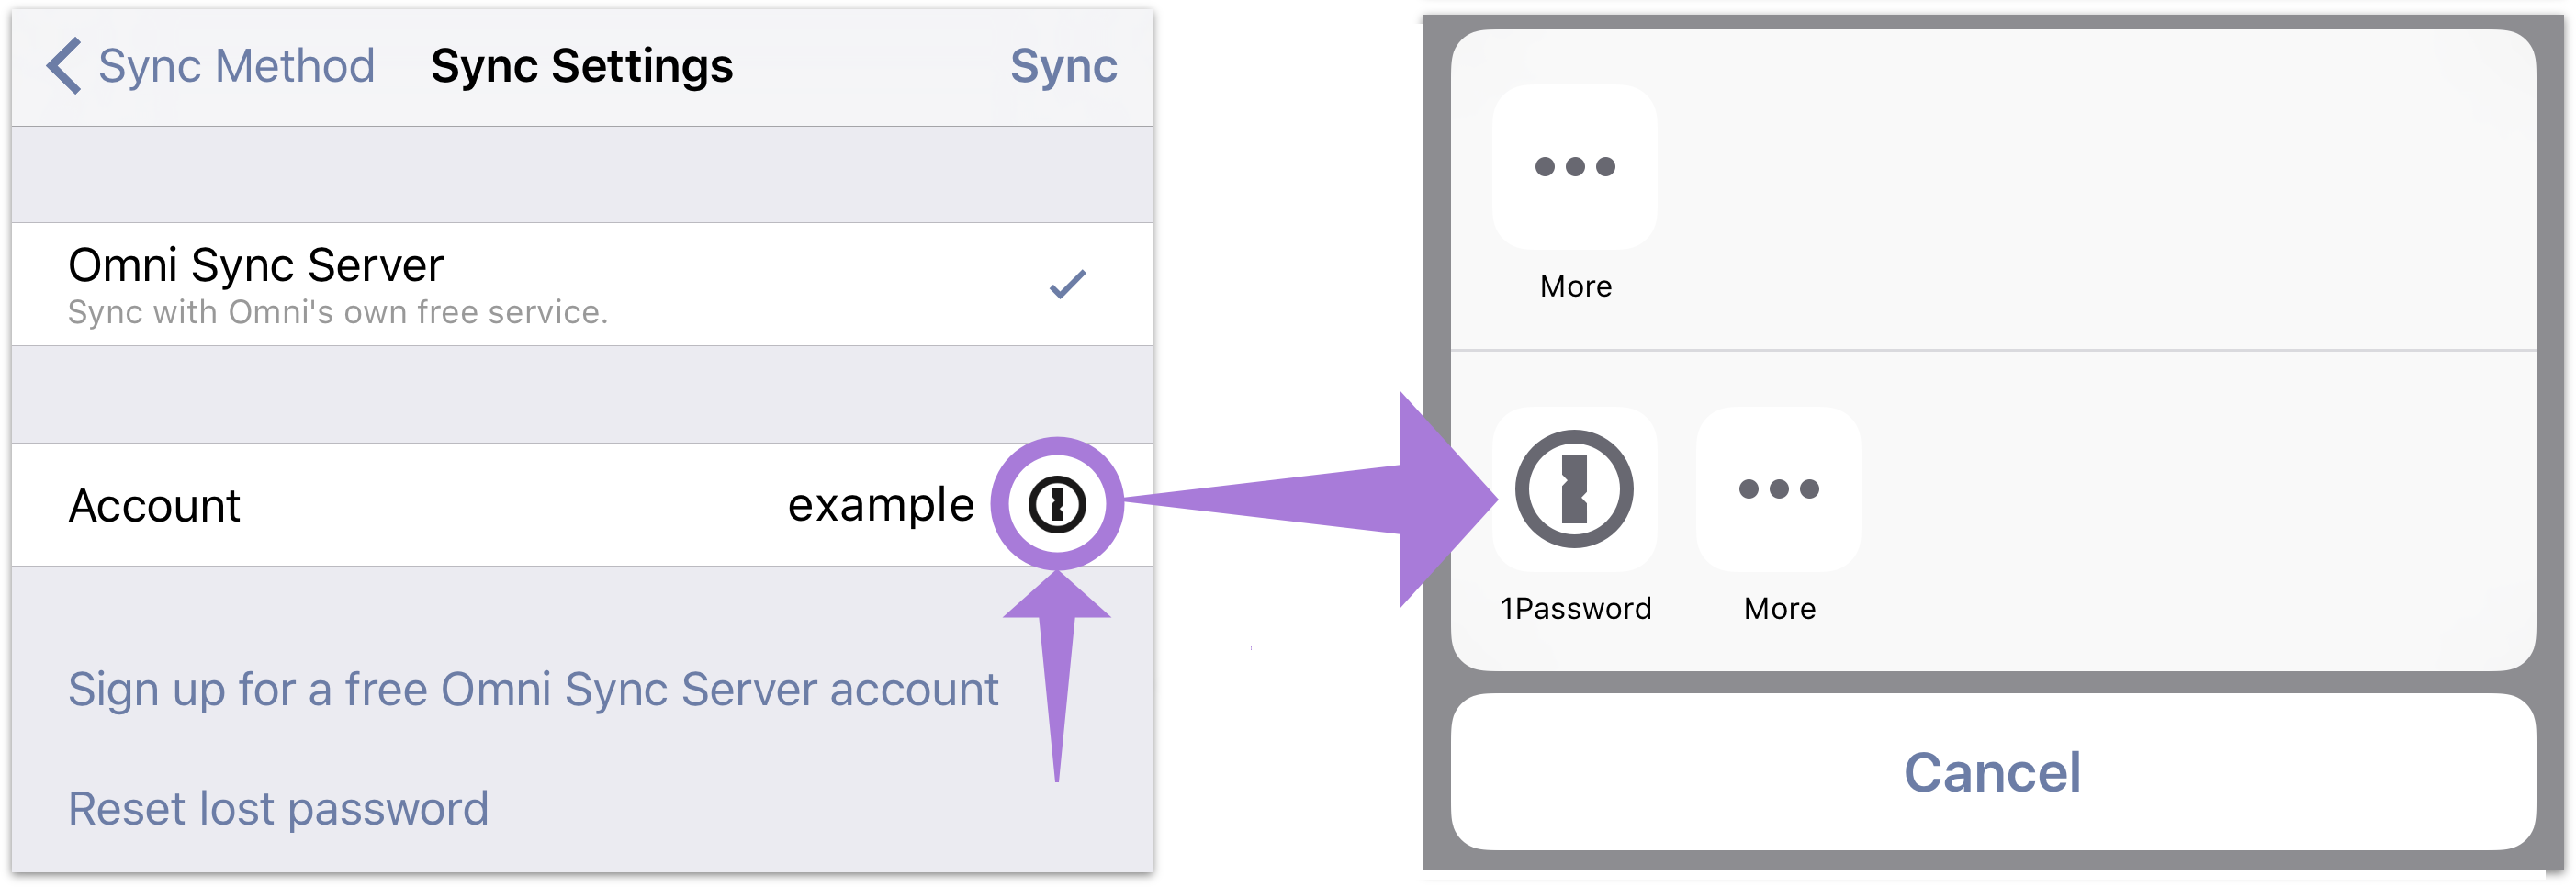 The Sync Settings screen with 1Password support available.